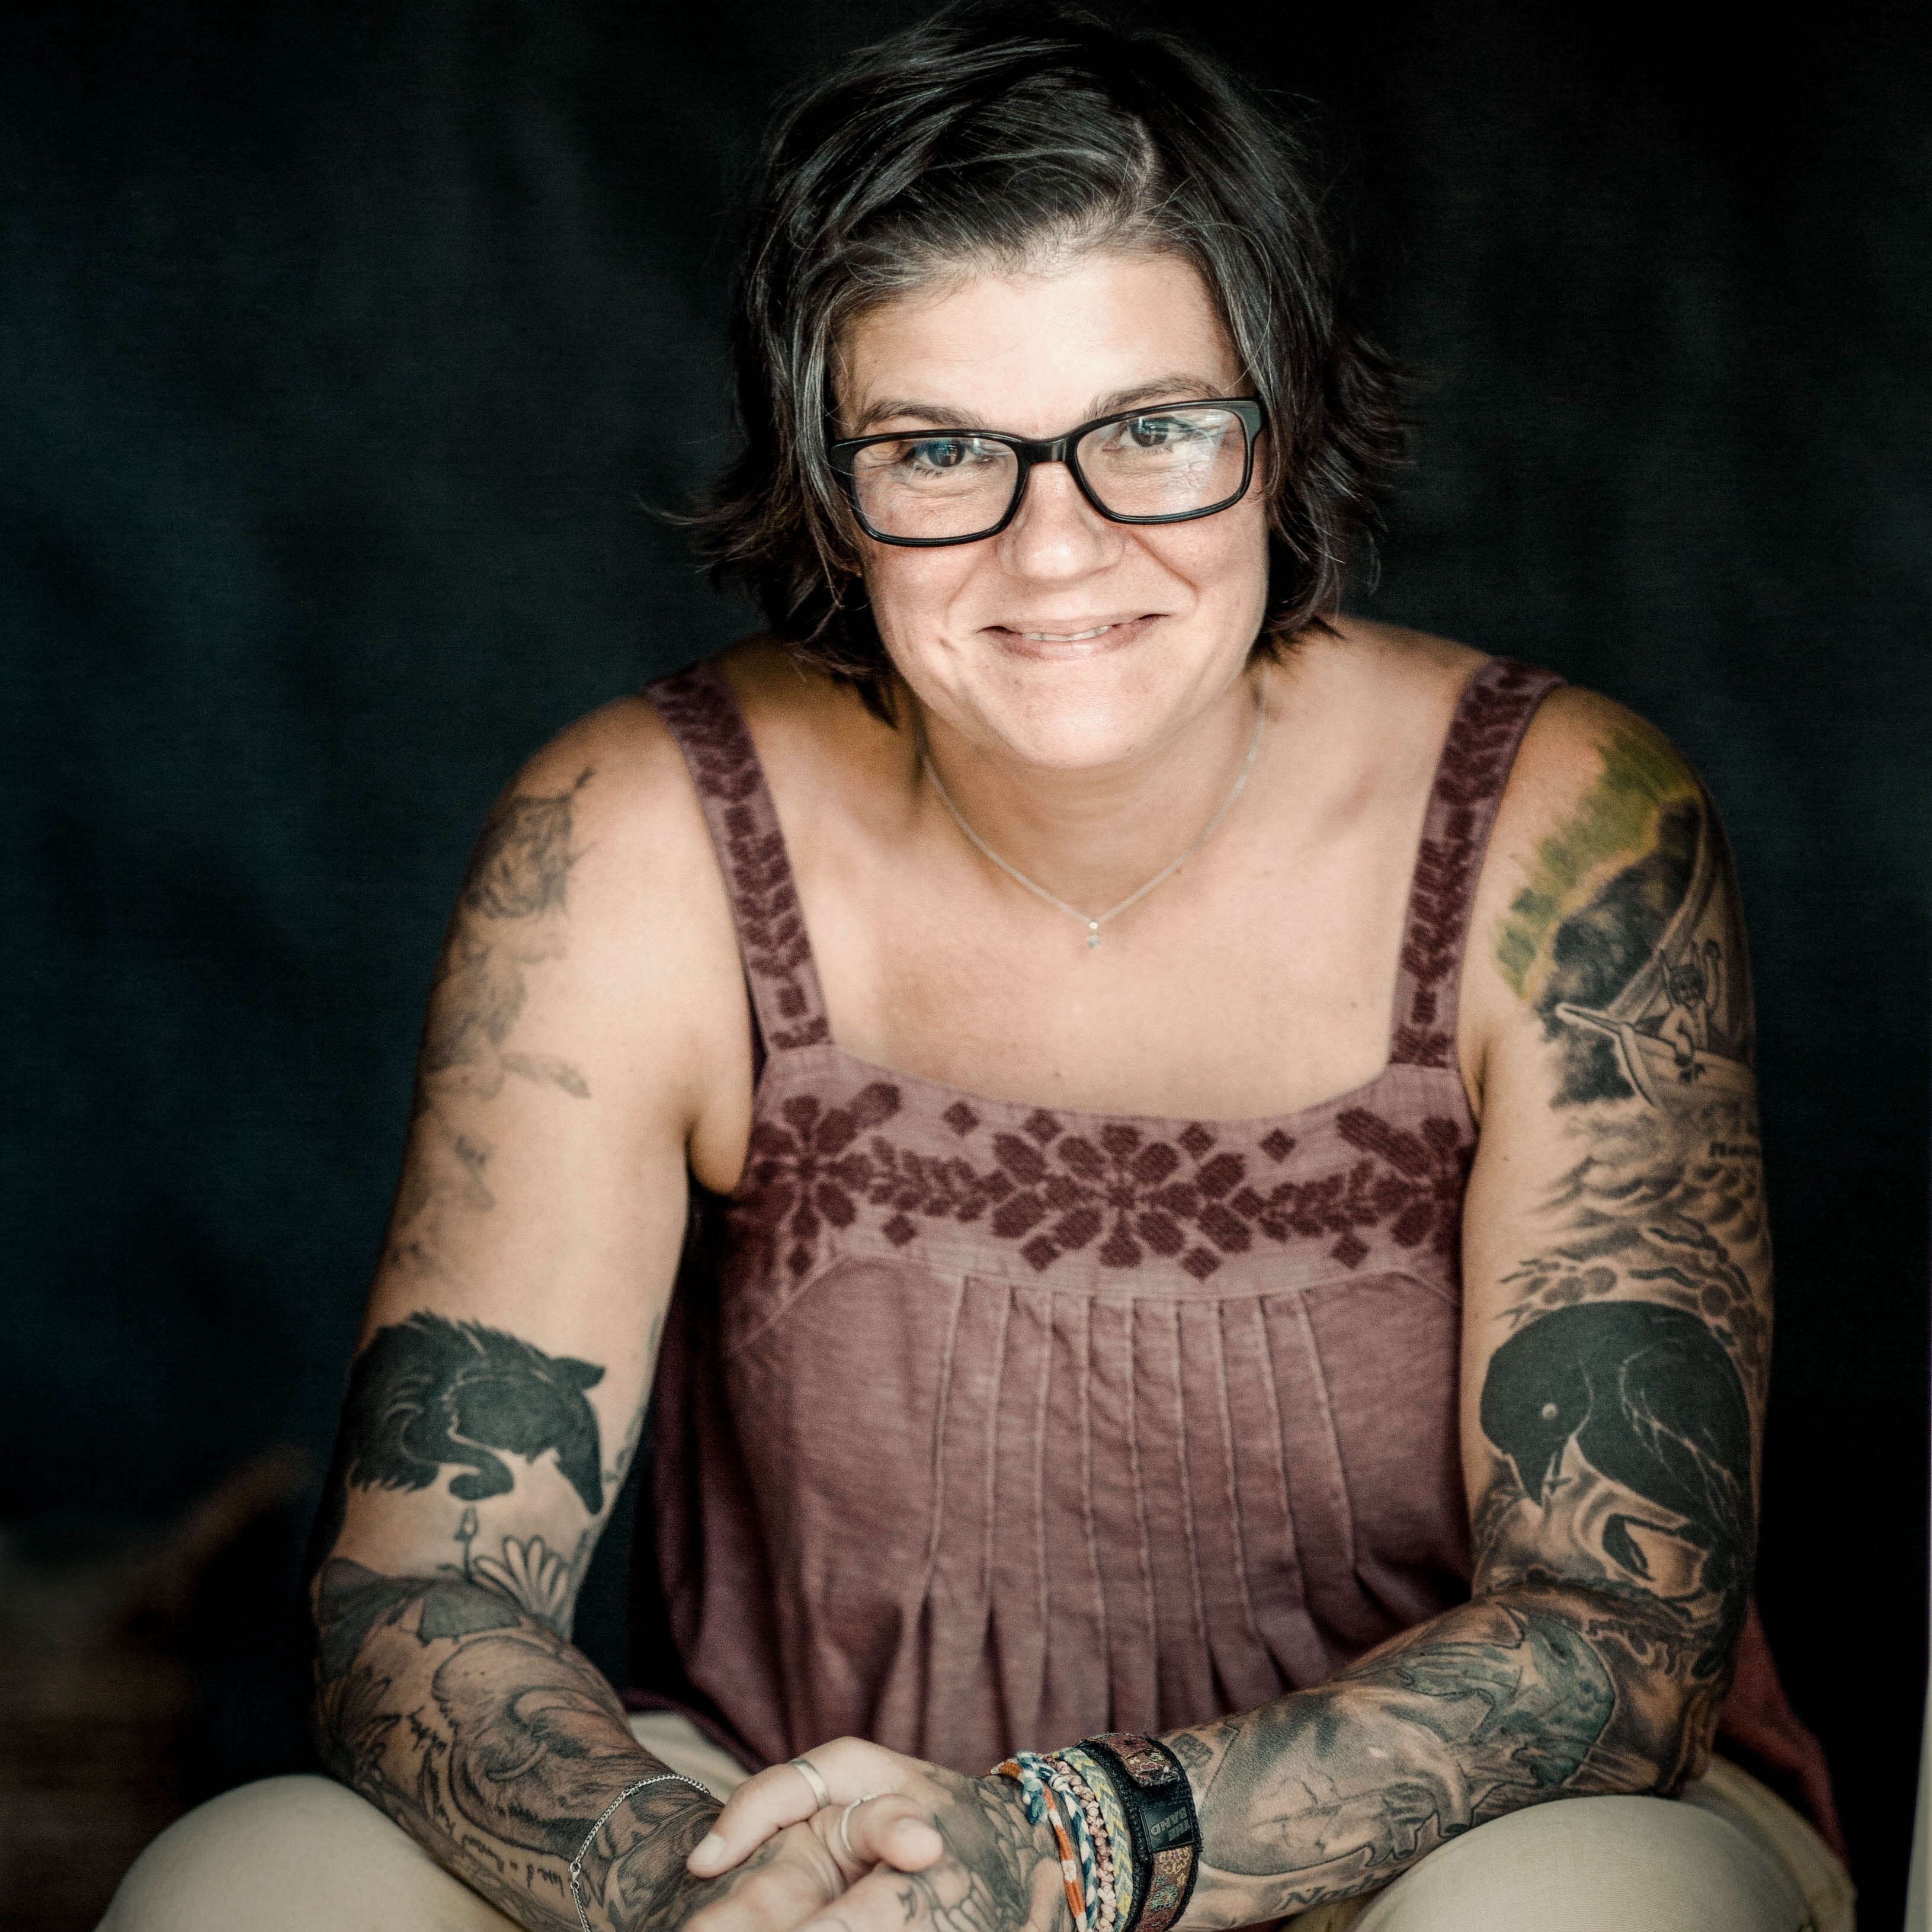 A white woman with short hair and full sleeves of tattoos smiles at the camera.